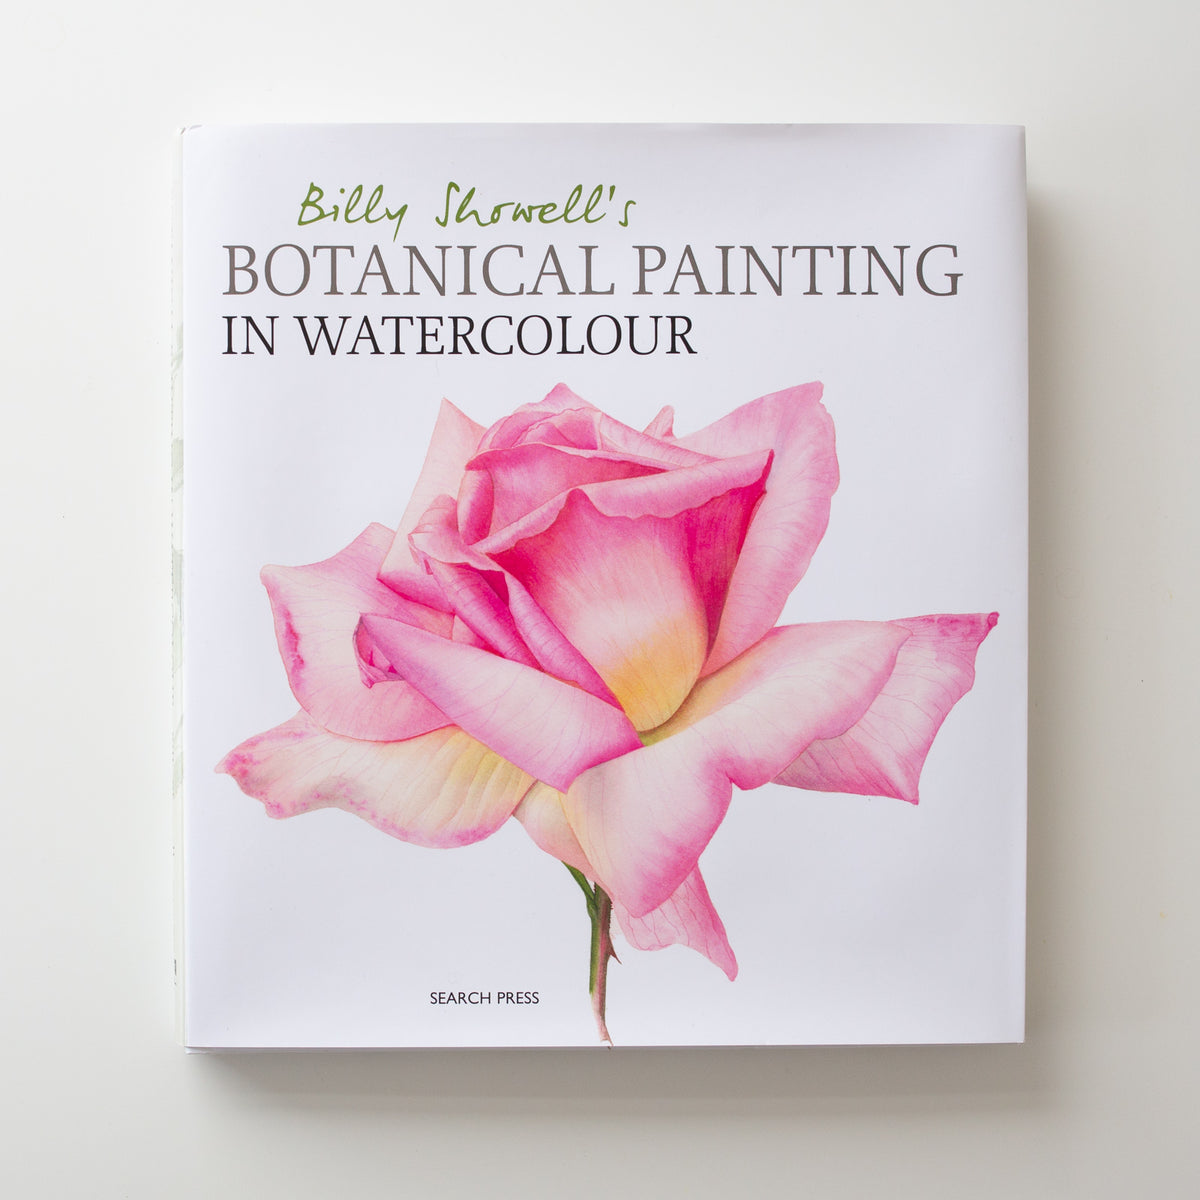 Botanical Painting in Watercolor' by Billy Howells